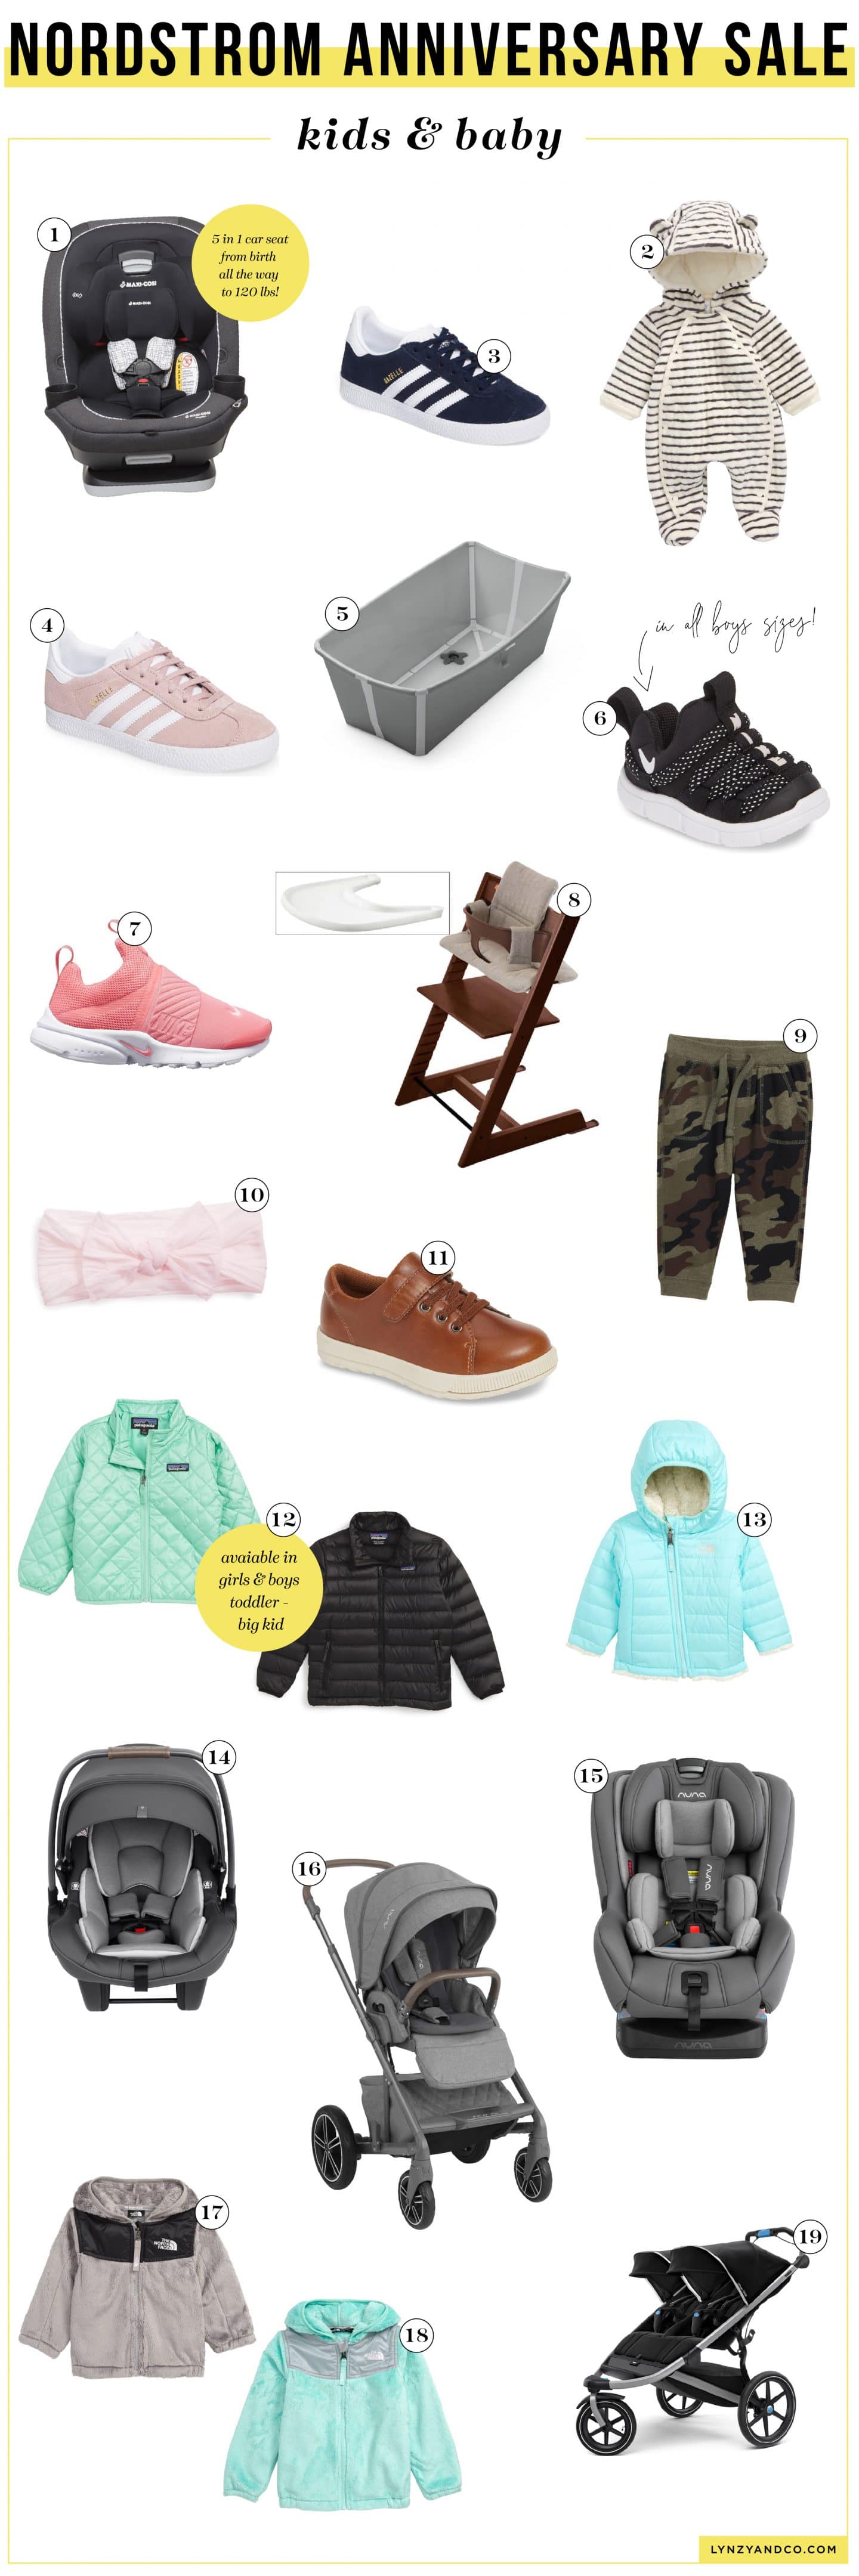 nordstrom anniversary sale kids shoes